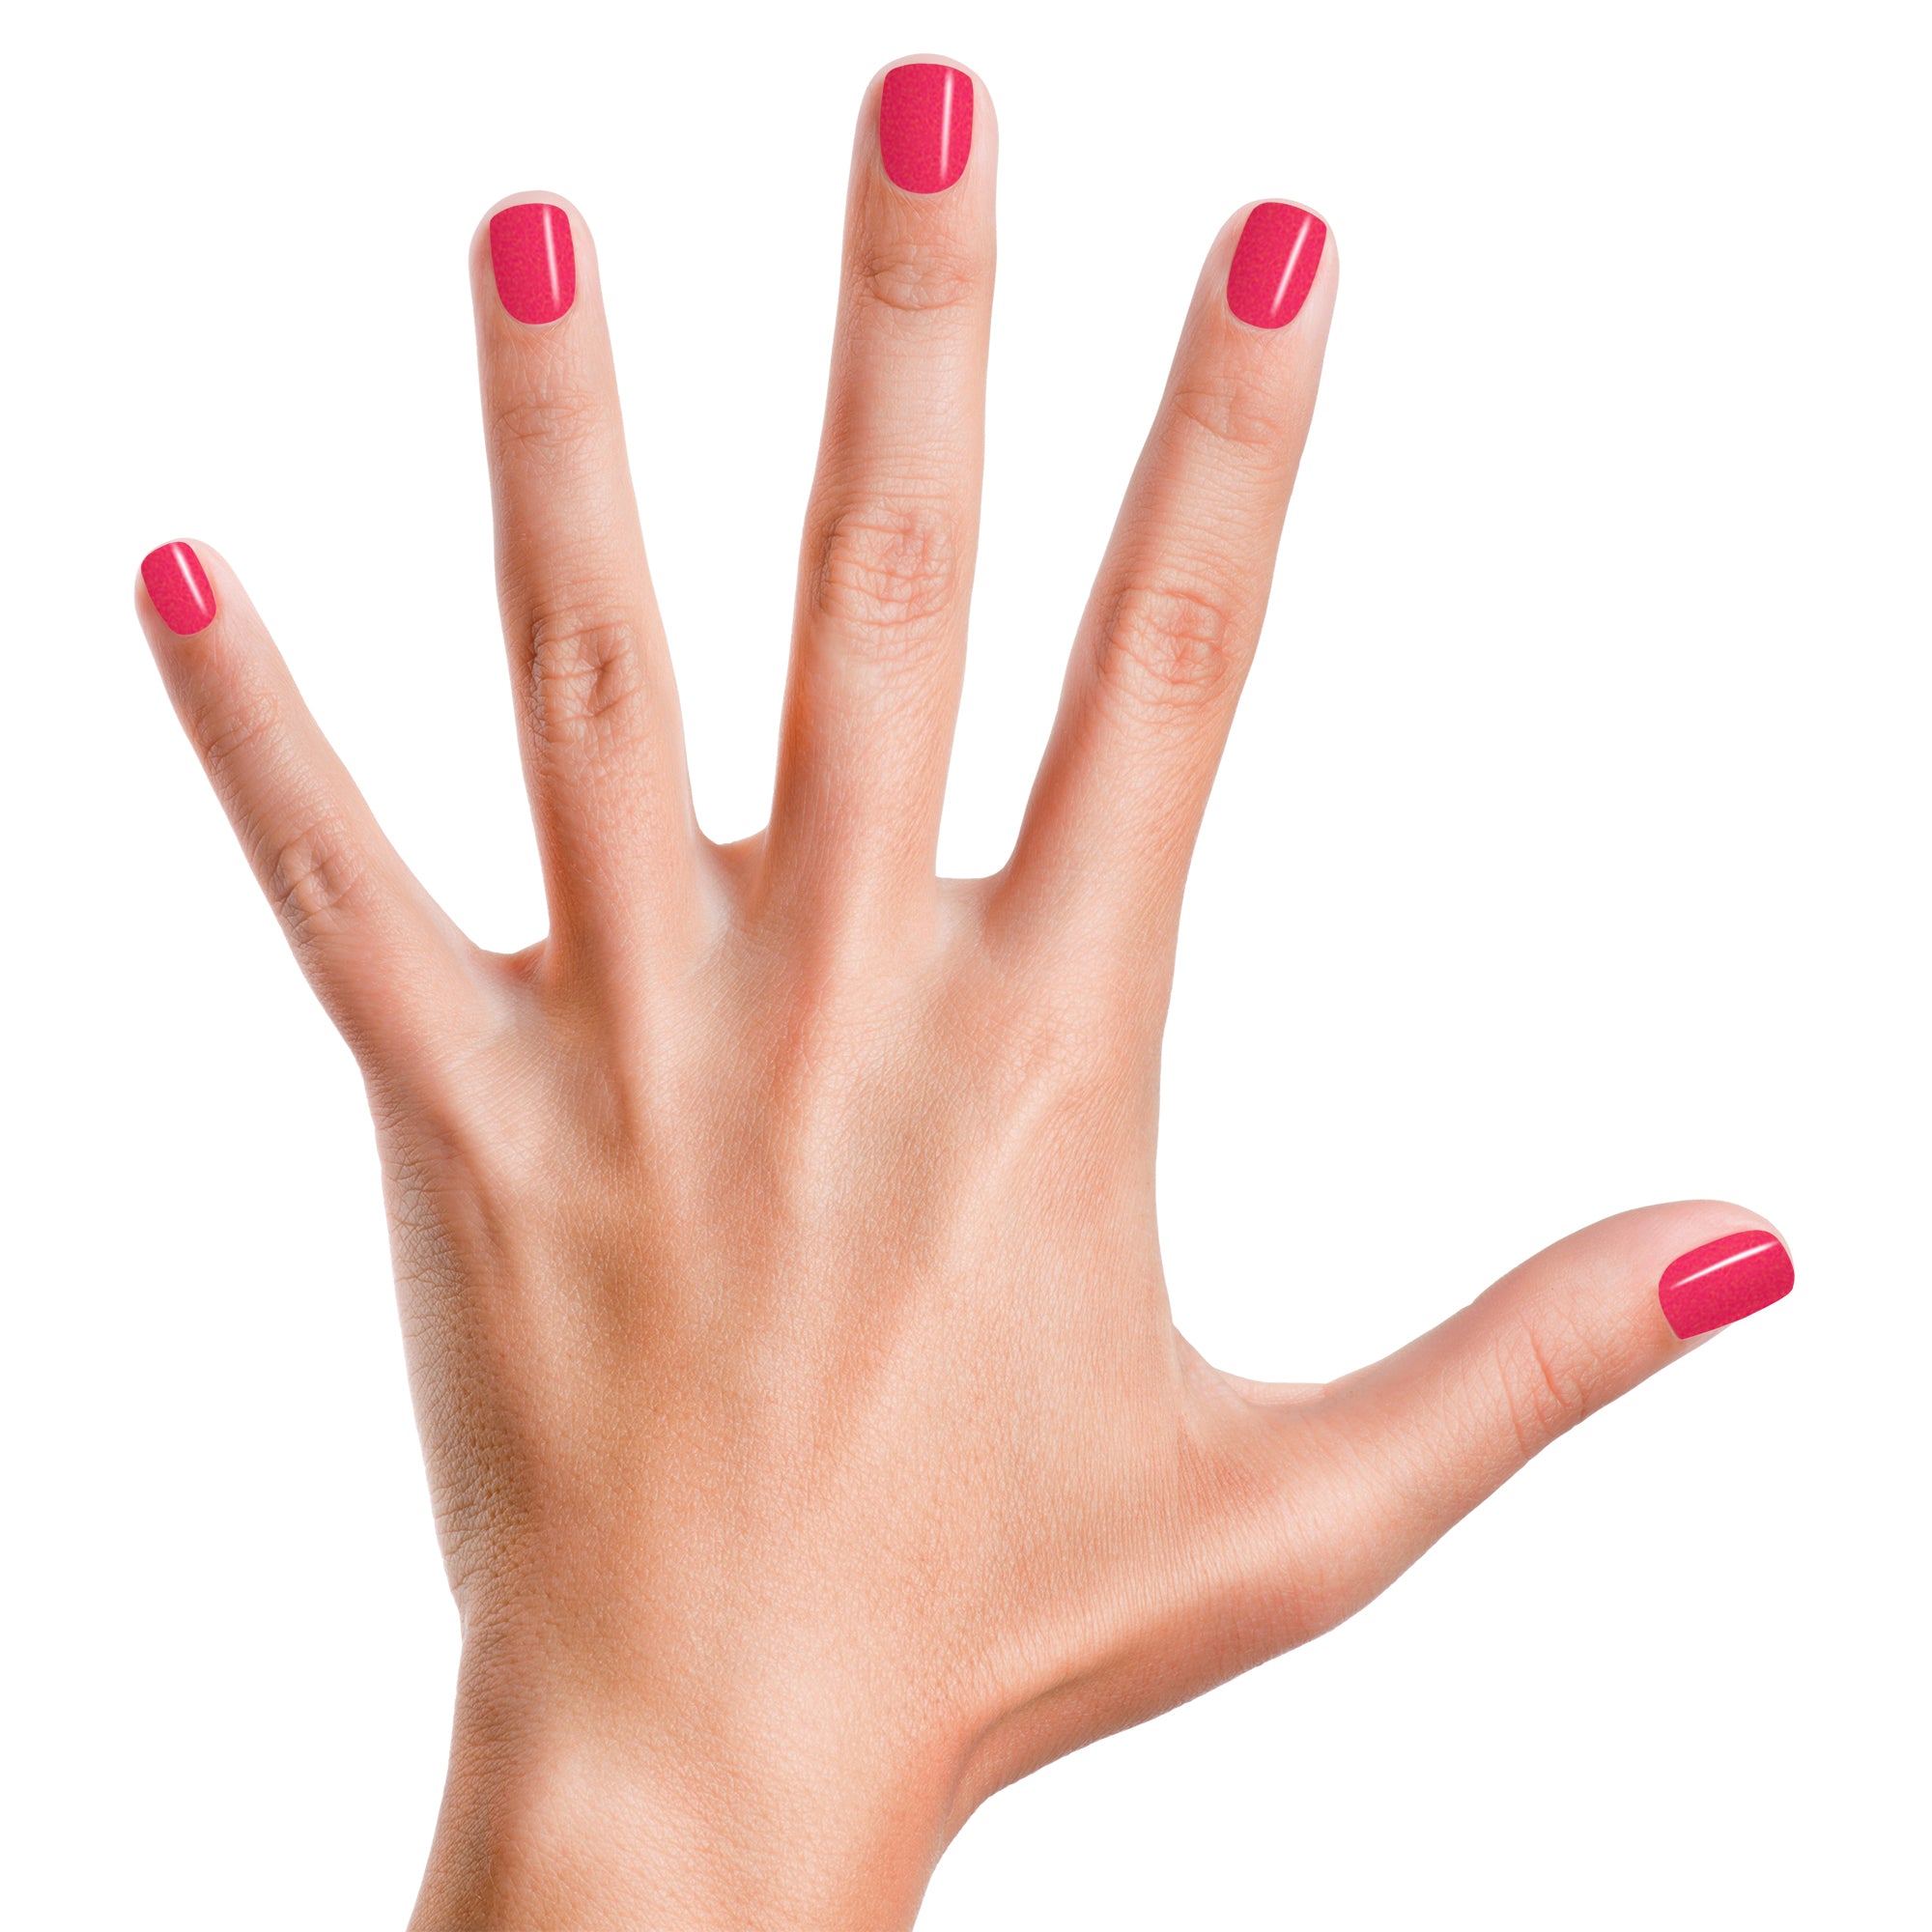 Haute In The Heat - Hot Pink Red Nail Polish - Essie